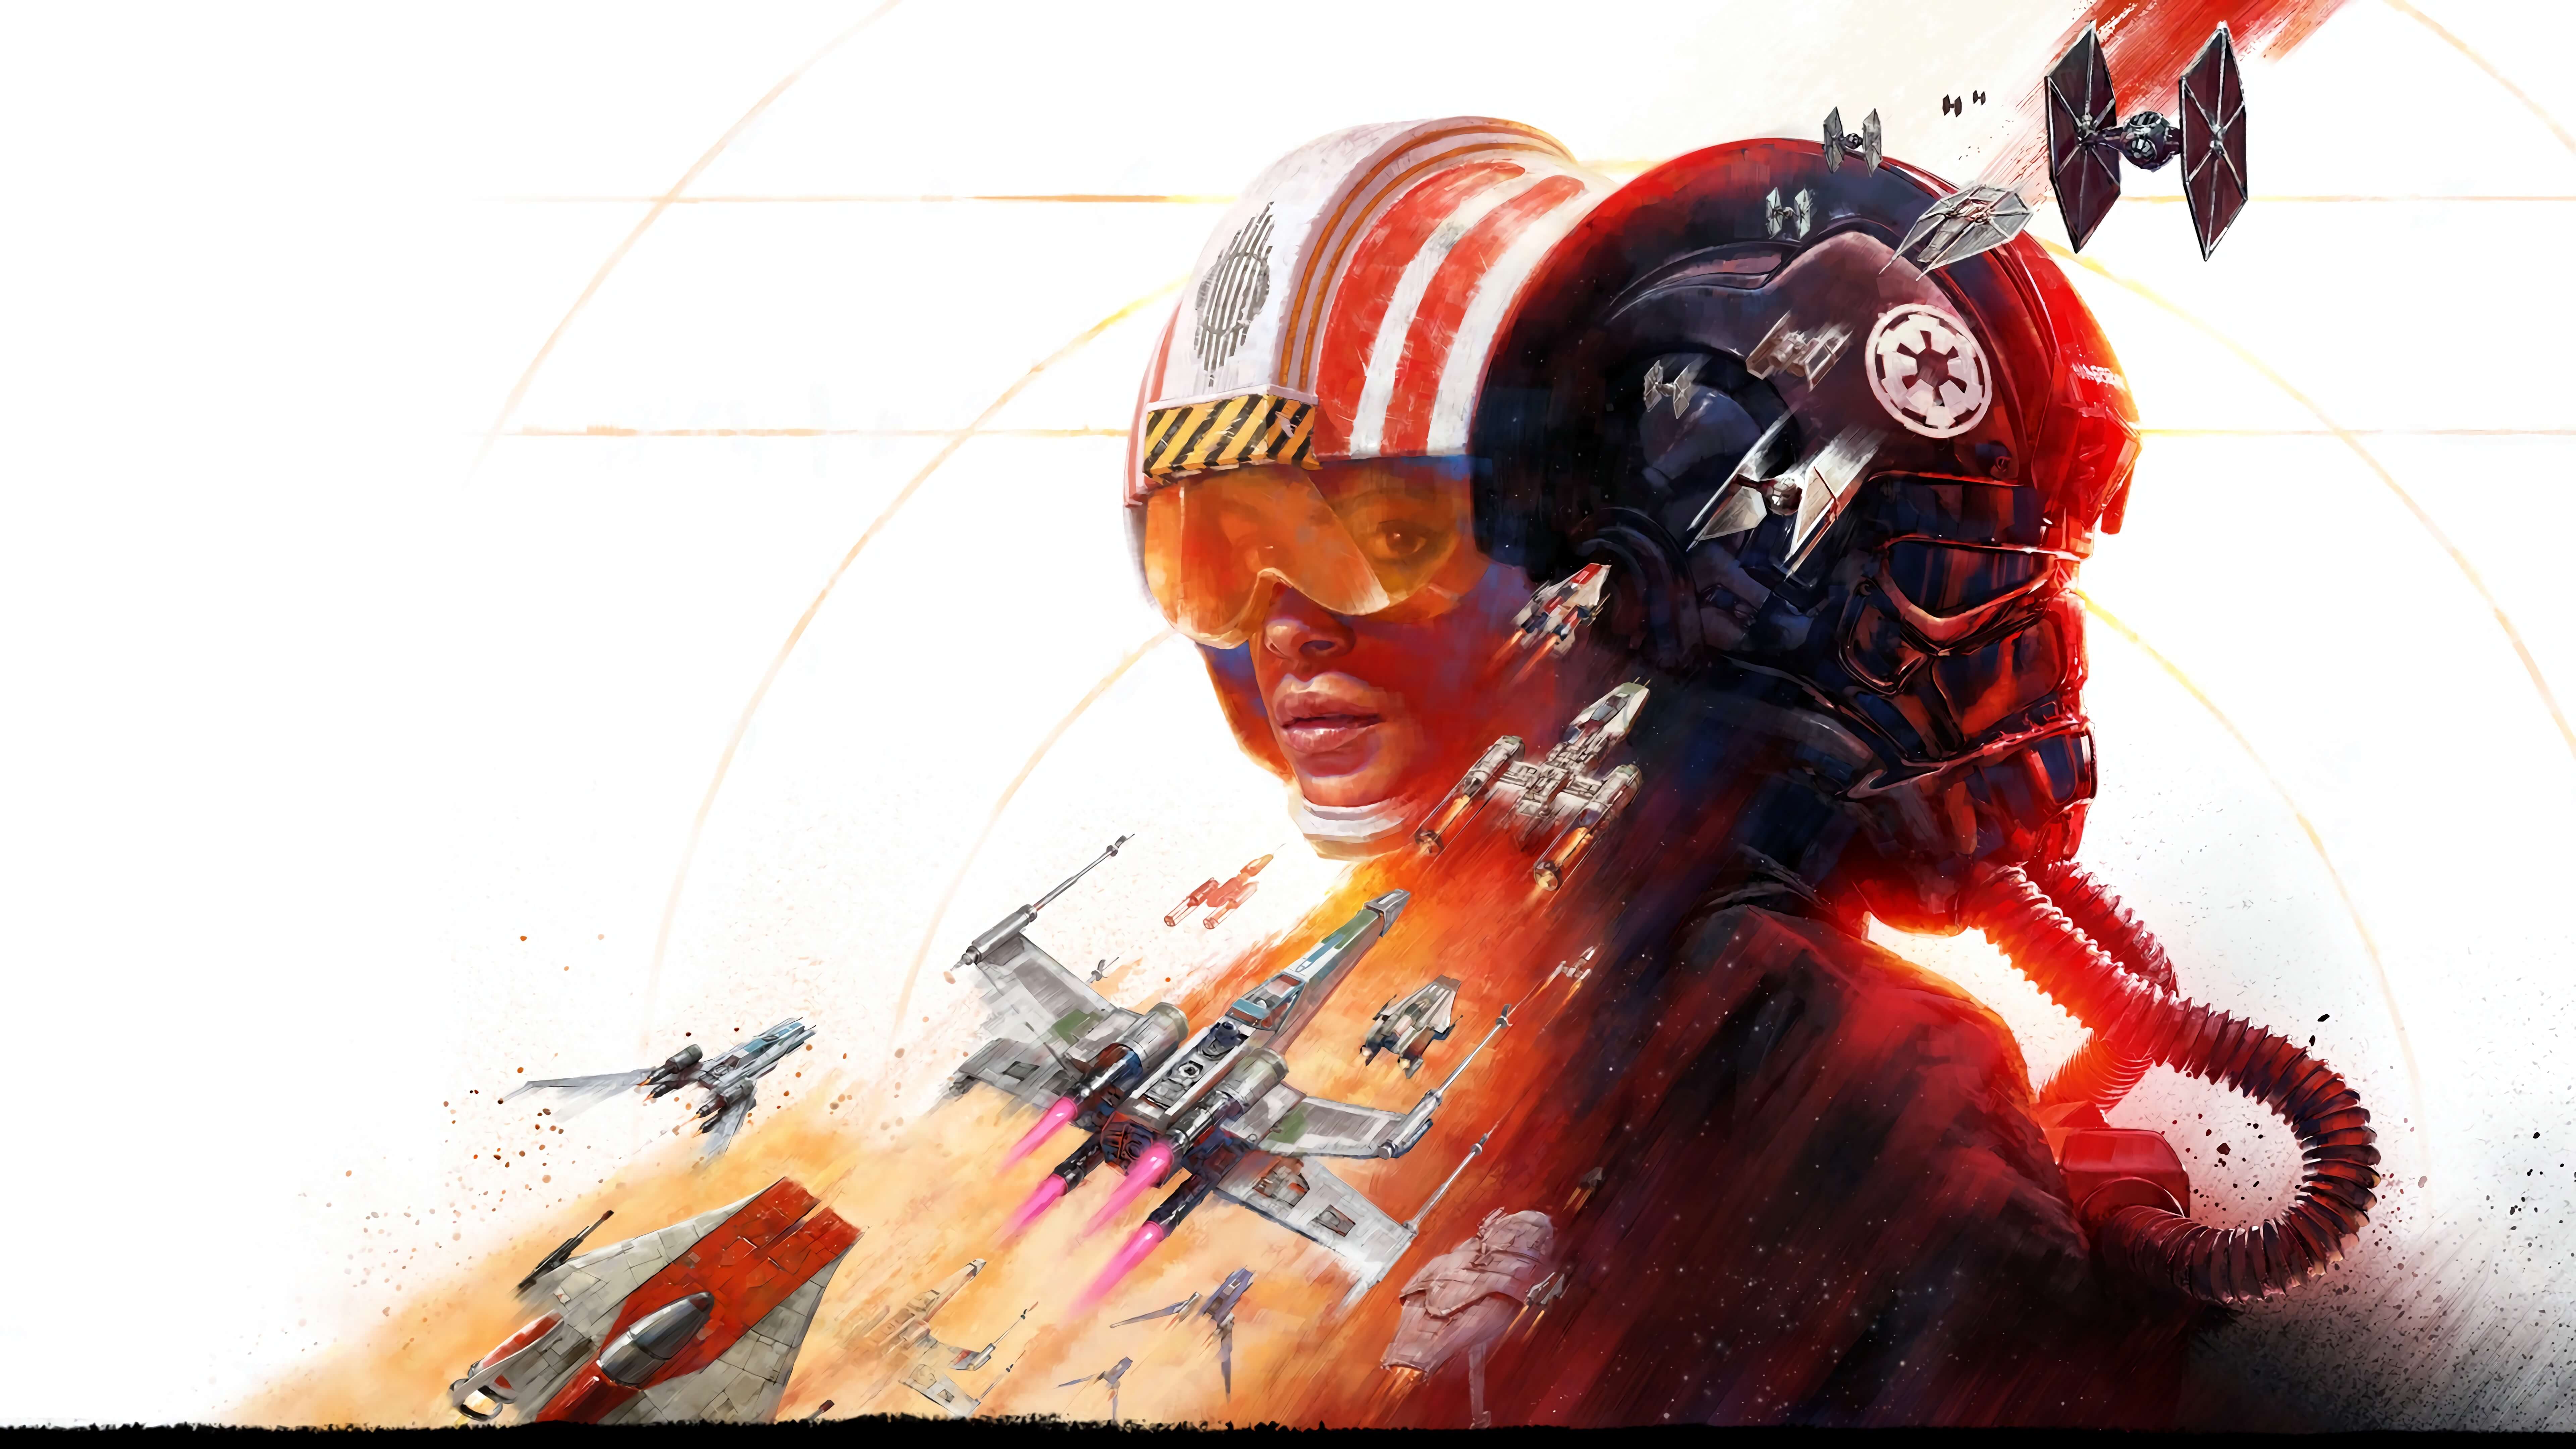 Squadrons By Star Wars Wallpapers Wallpaperhub